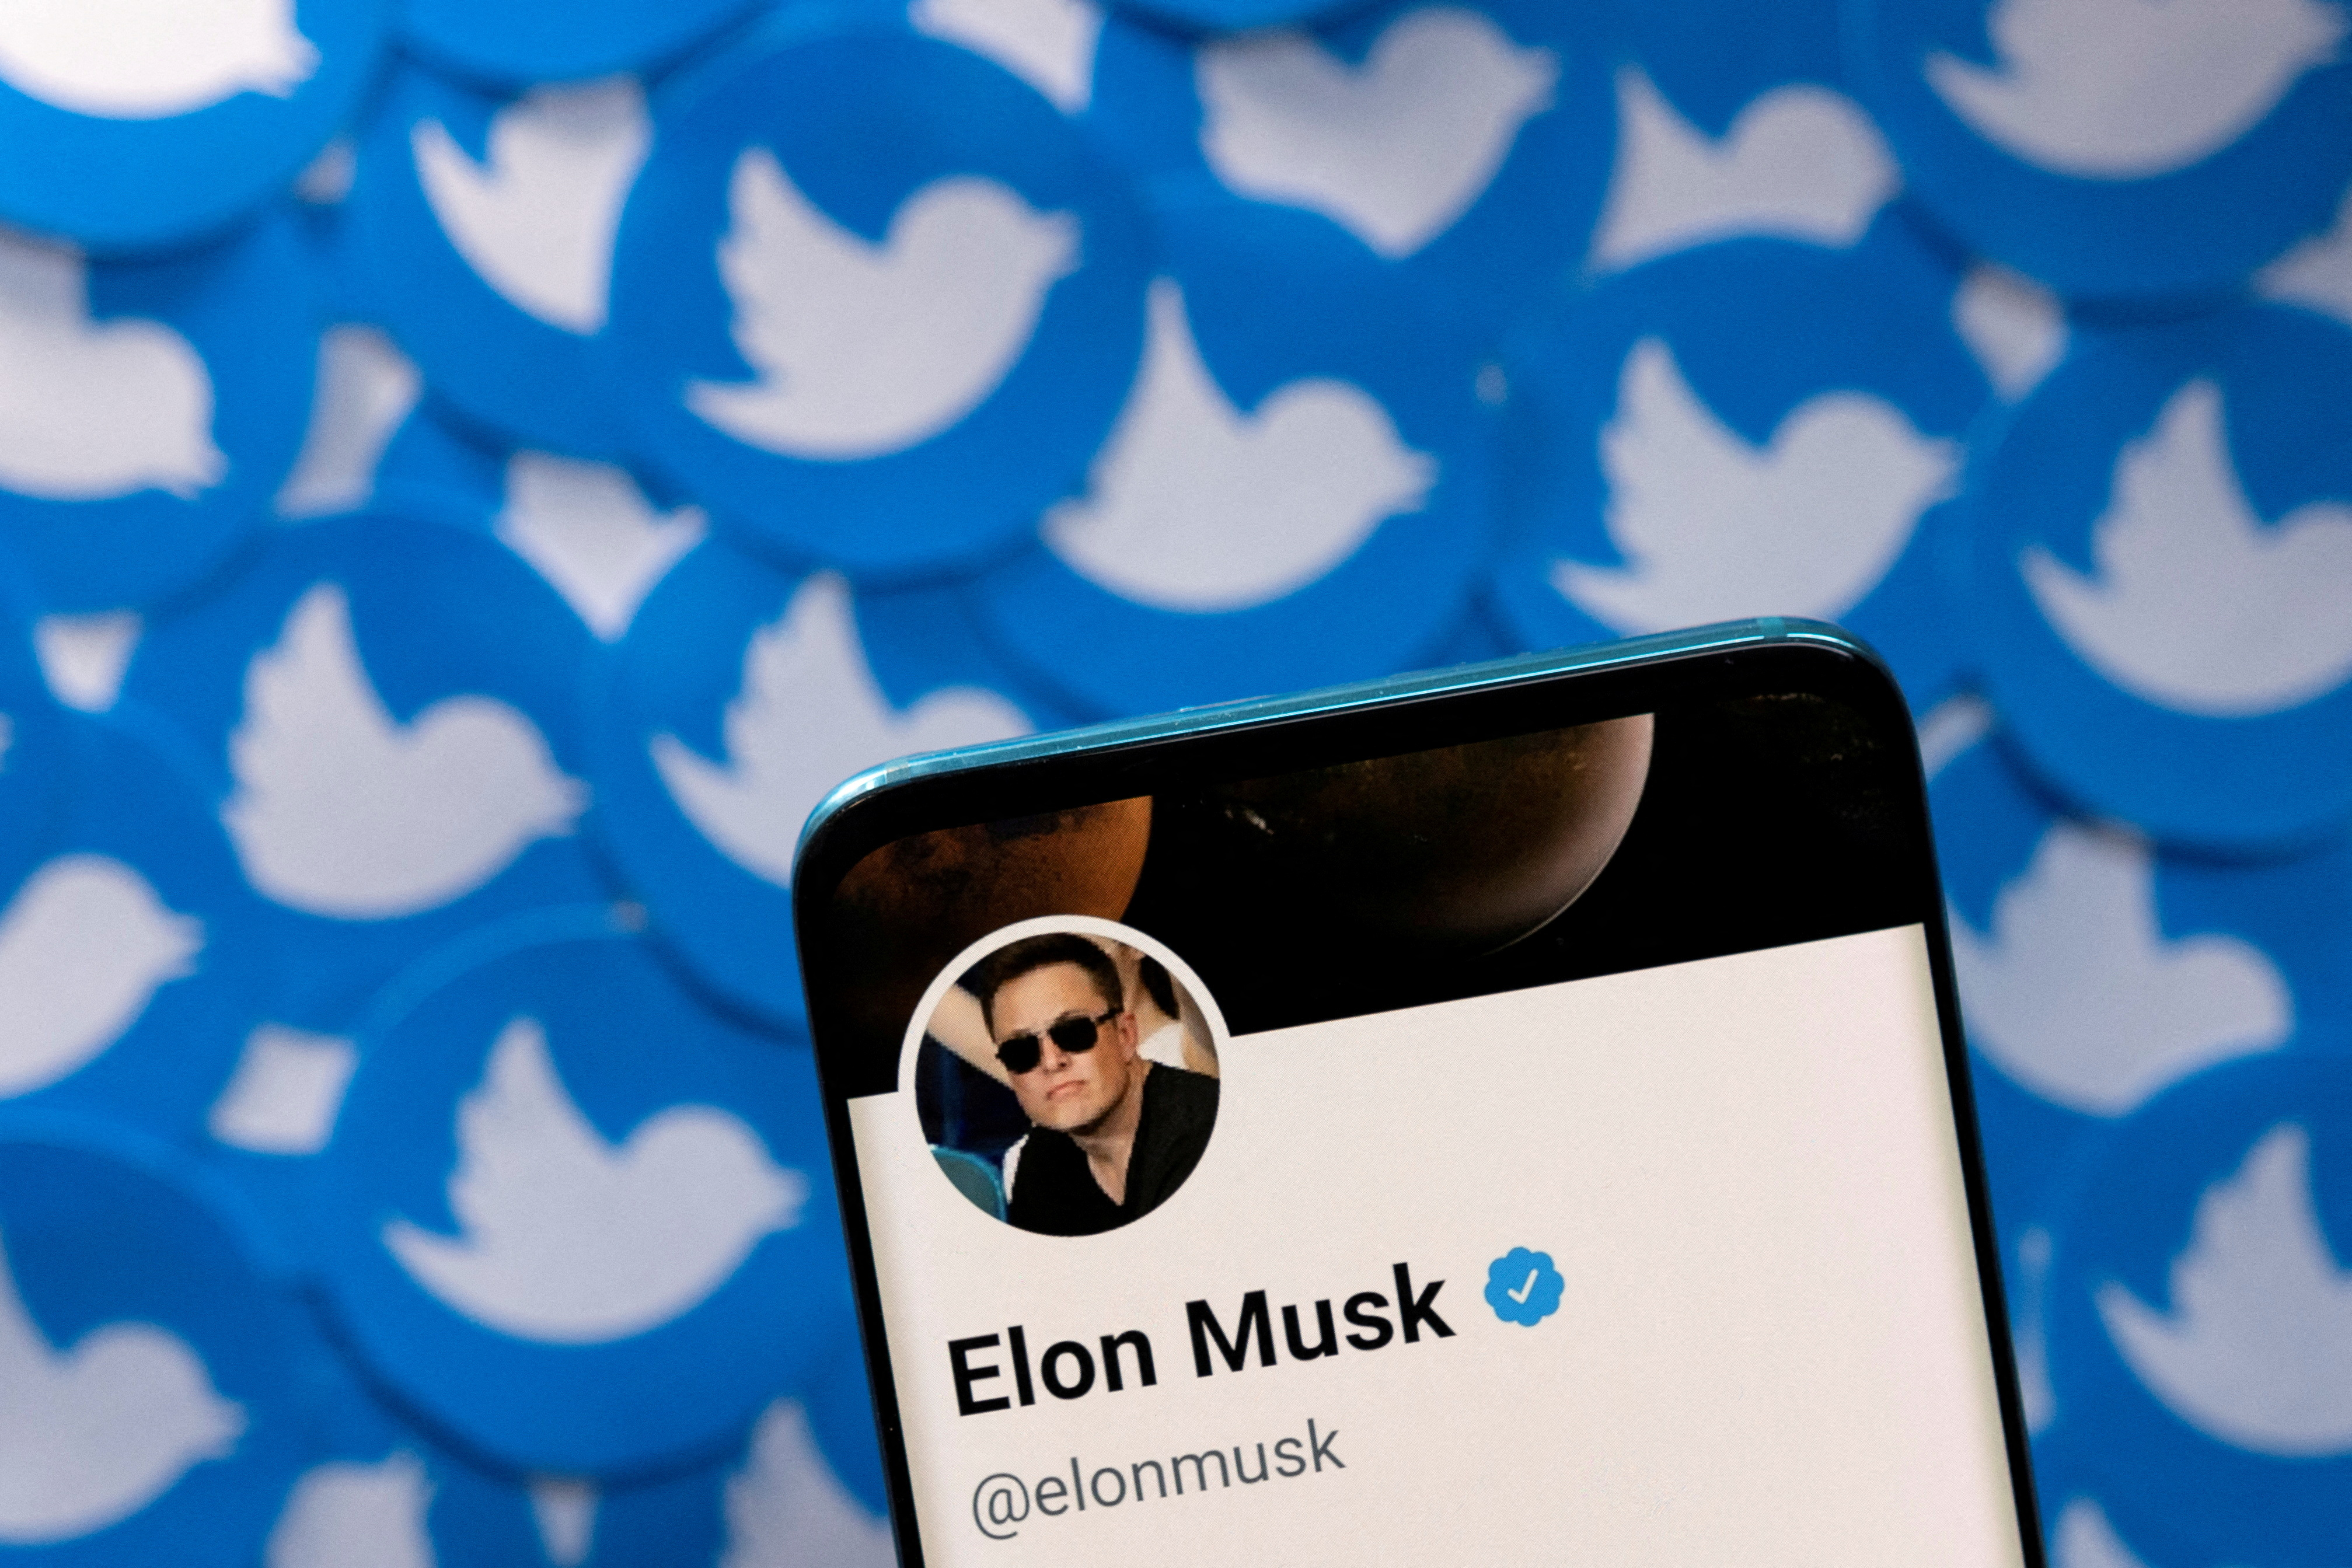 image As Elon Musk takes over Twitter, free speech limits tested